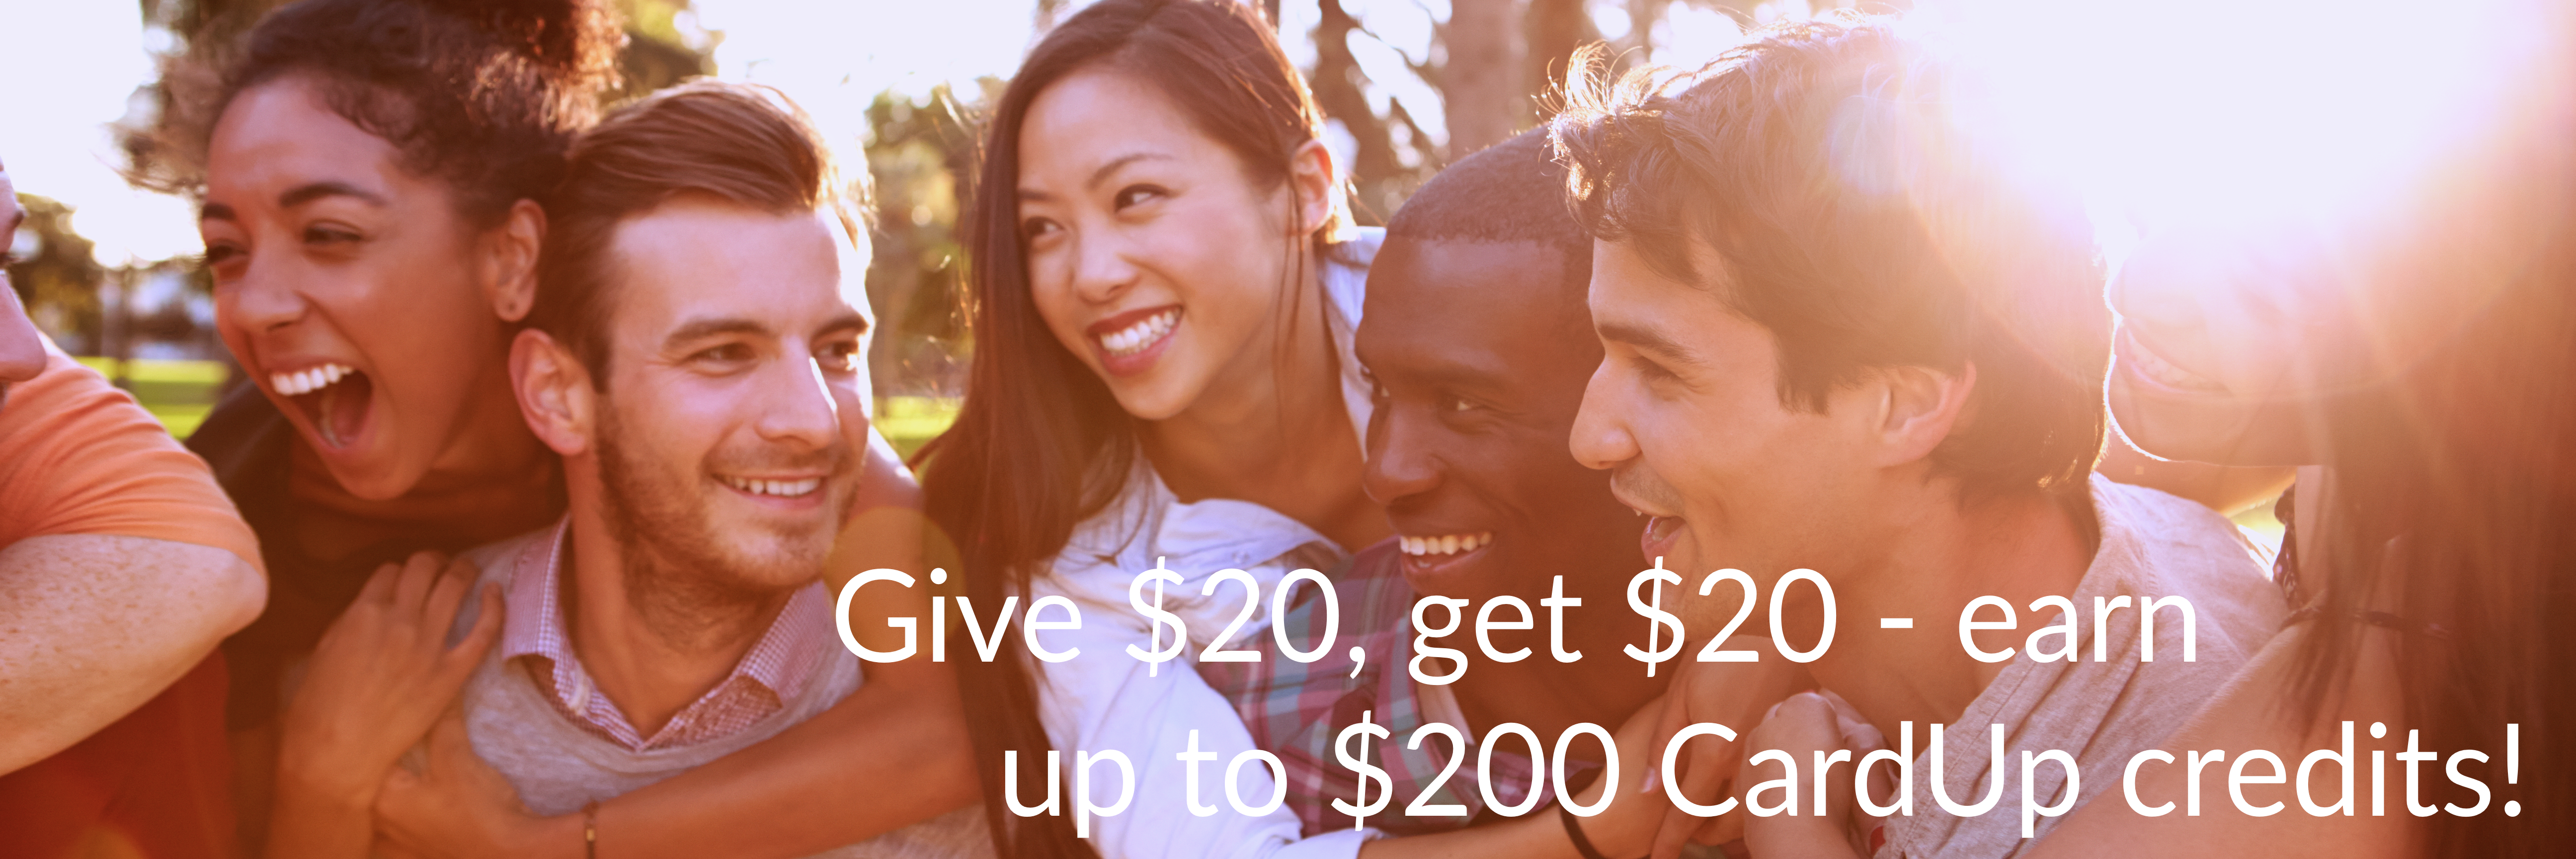 Give $20, get $20